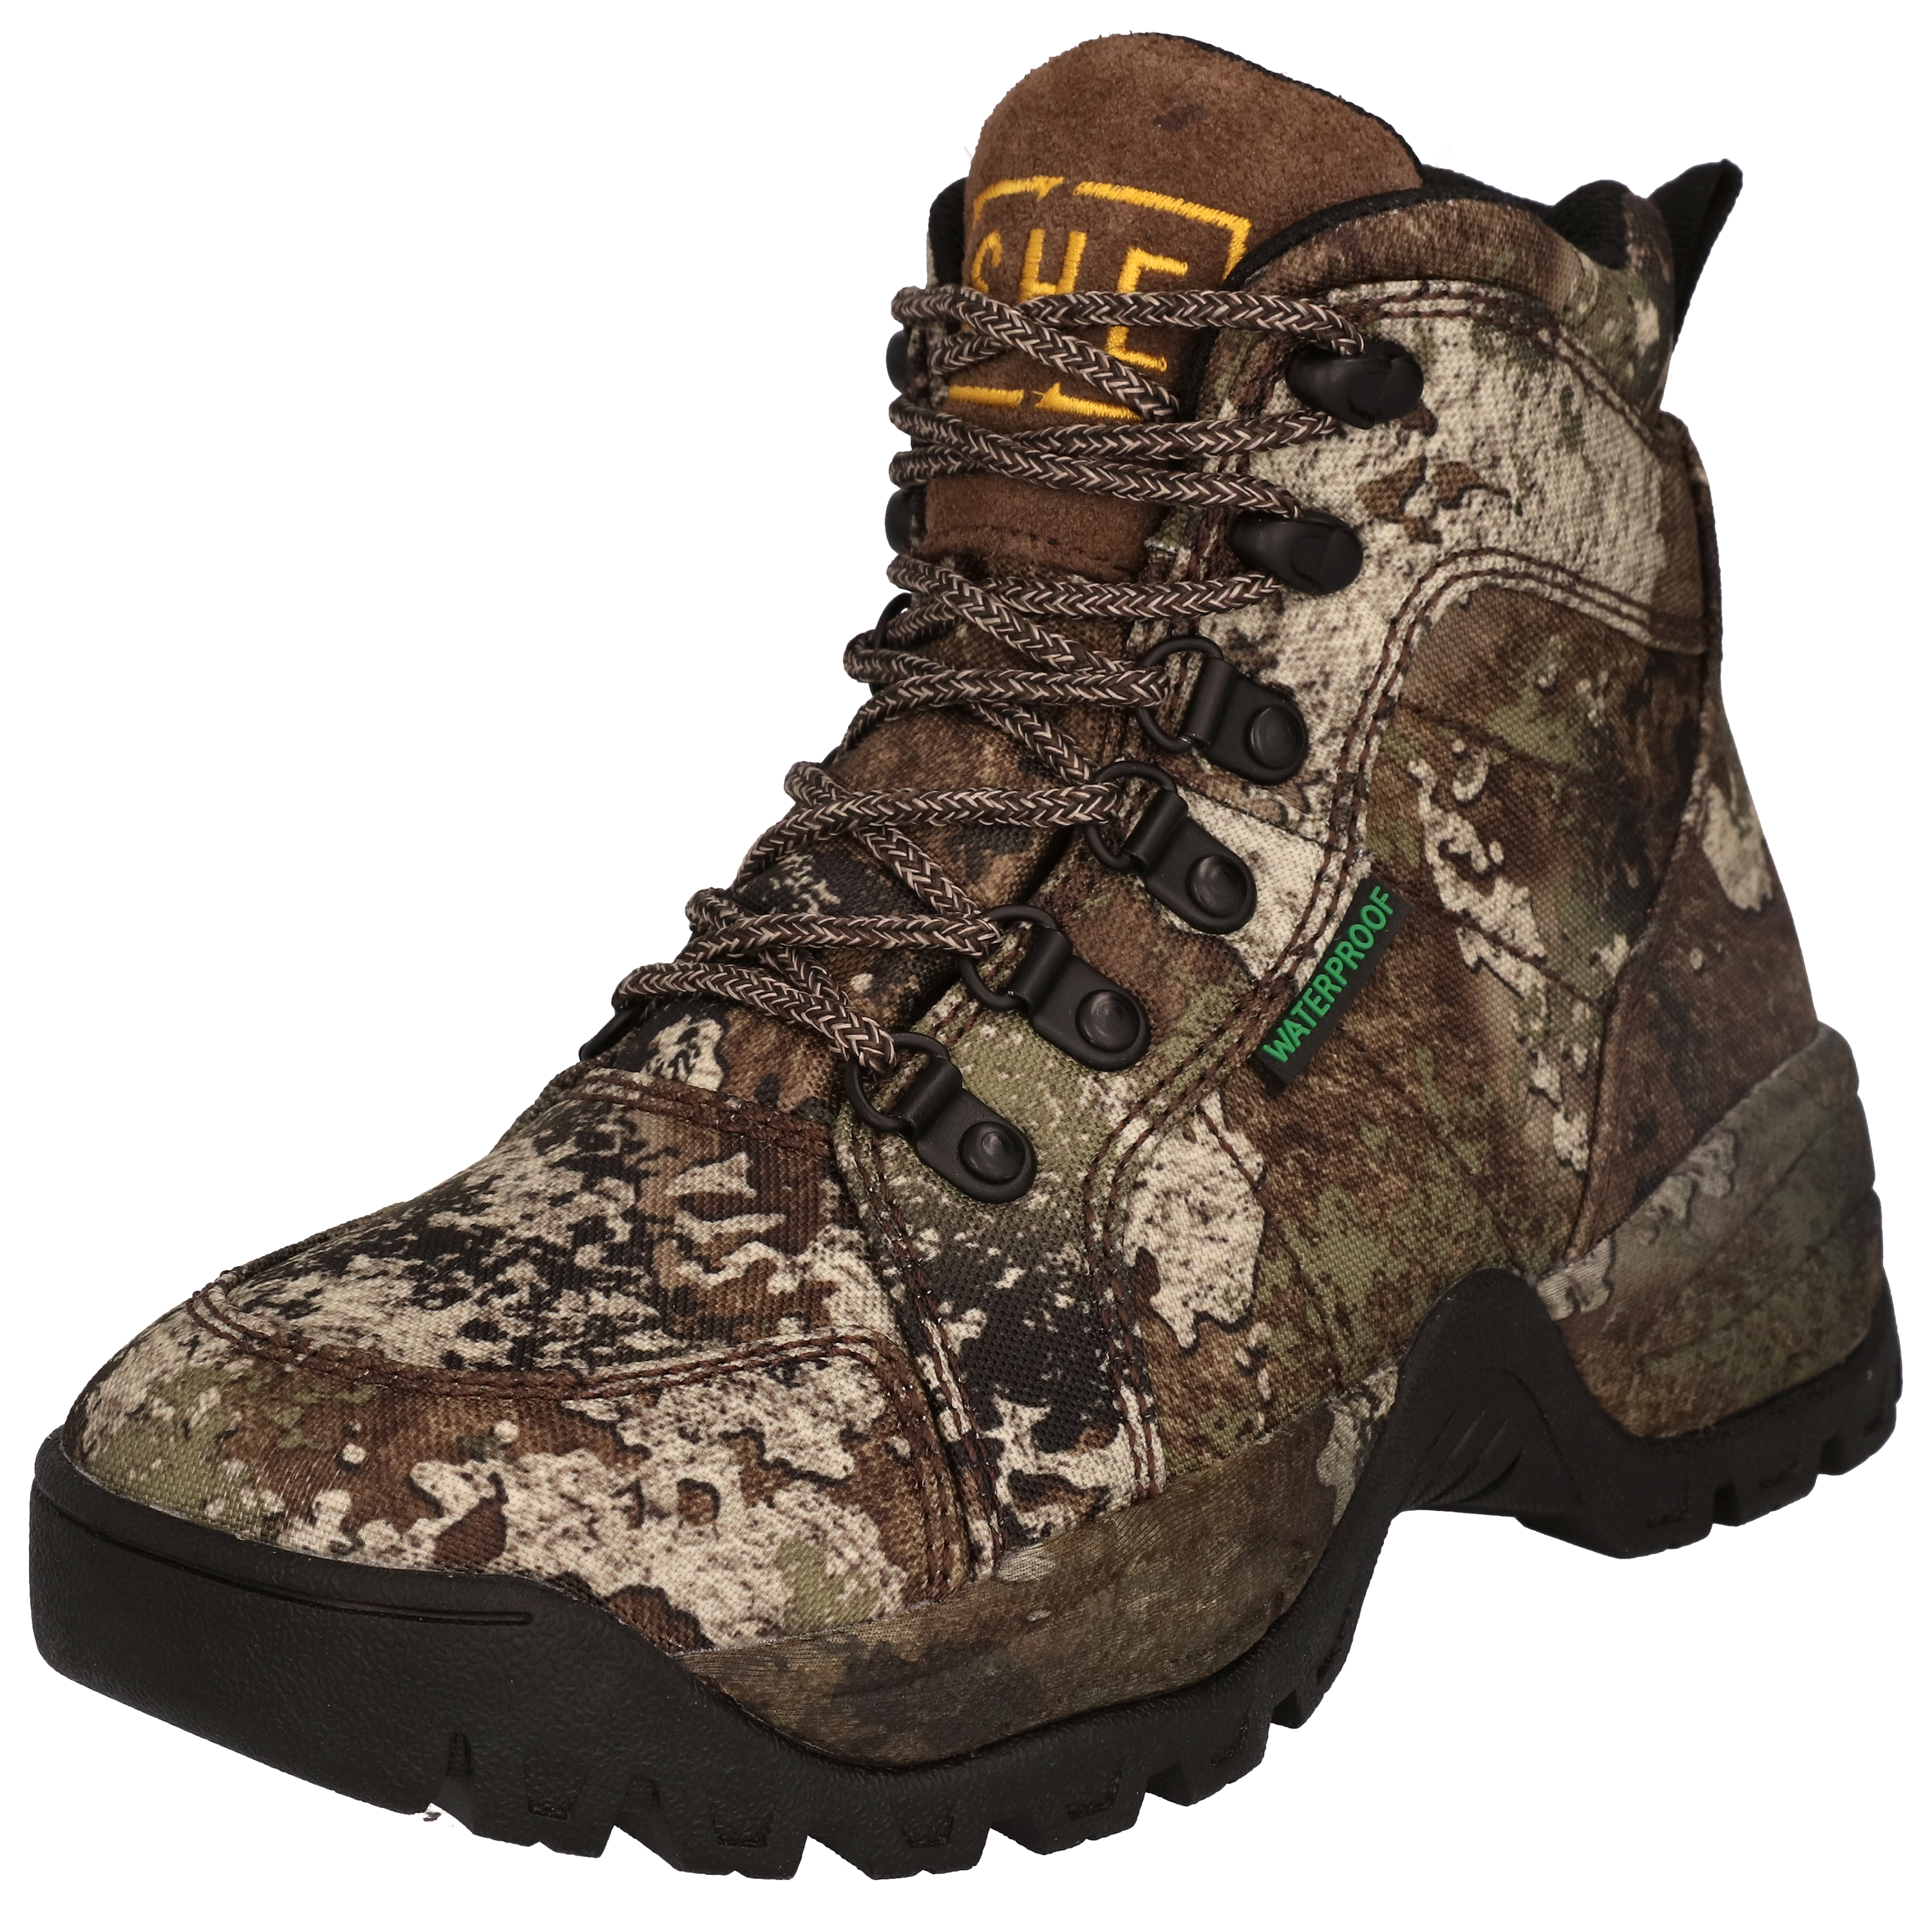 SHE Outdoor Timber Buck Waterproof Hunting Boots for Ladies - TrueTimber Strata - 8M